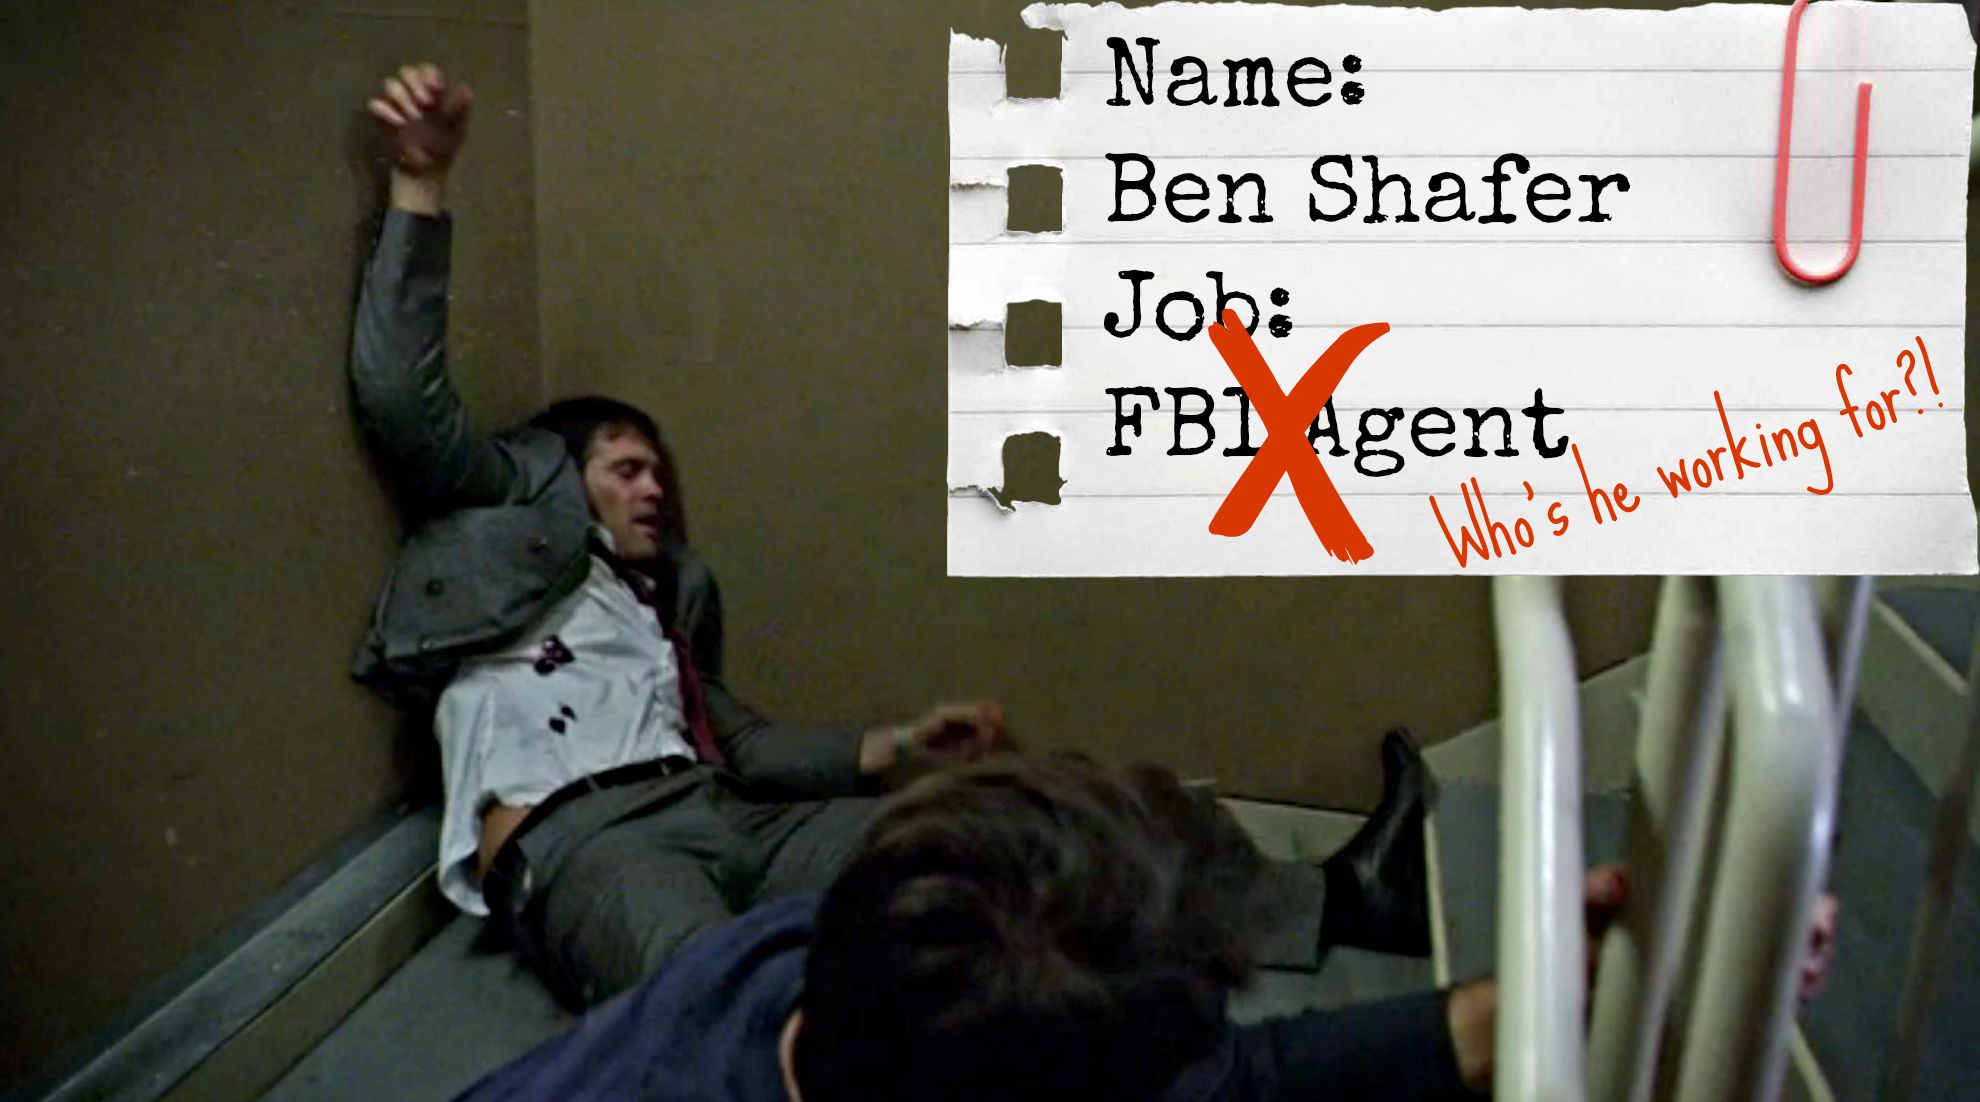 Who was Ben Shafer working for?